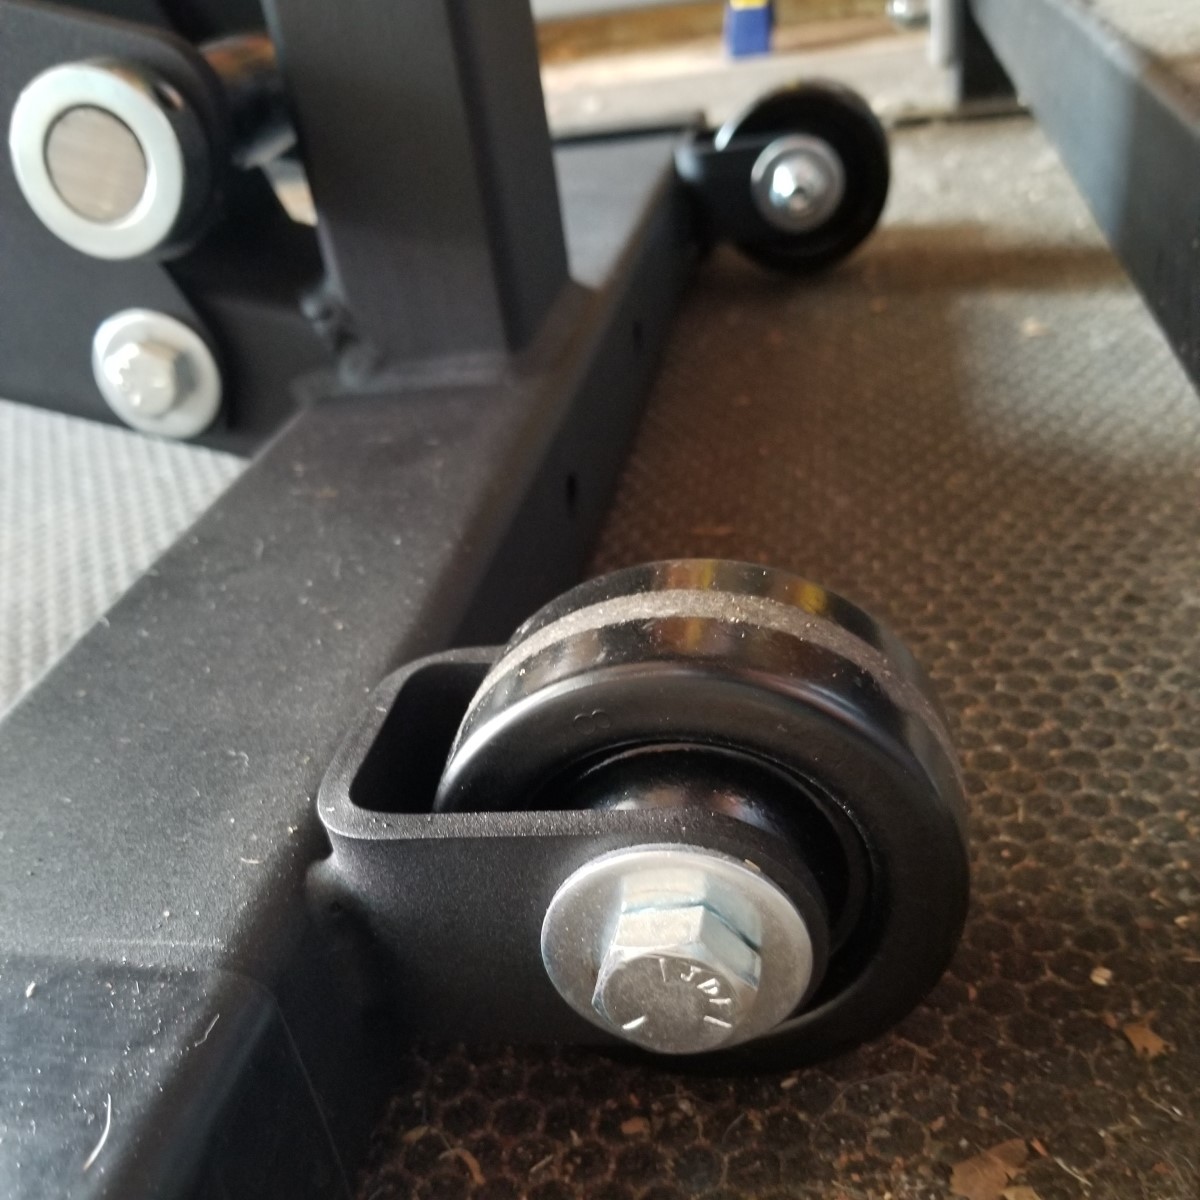 wheels of the Rogue Adjustable Bench 2.0